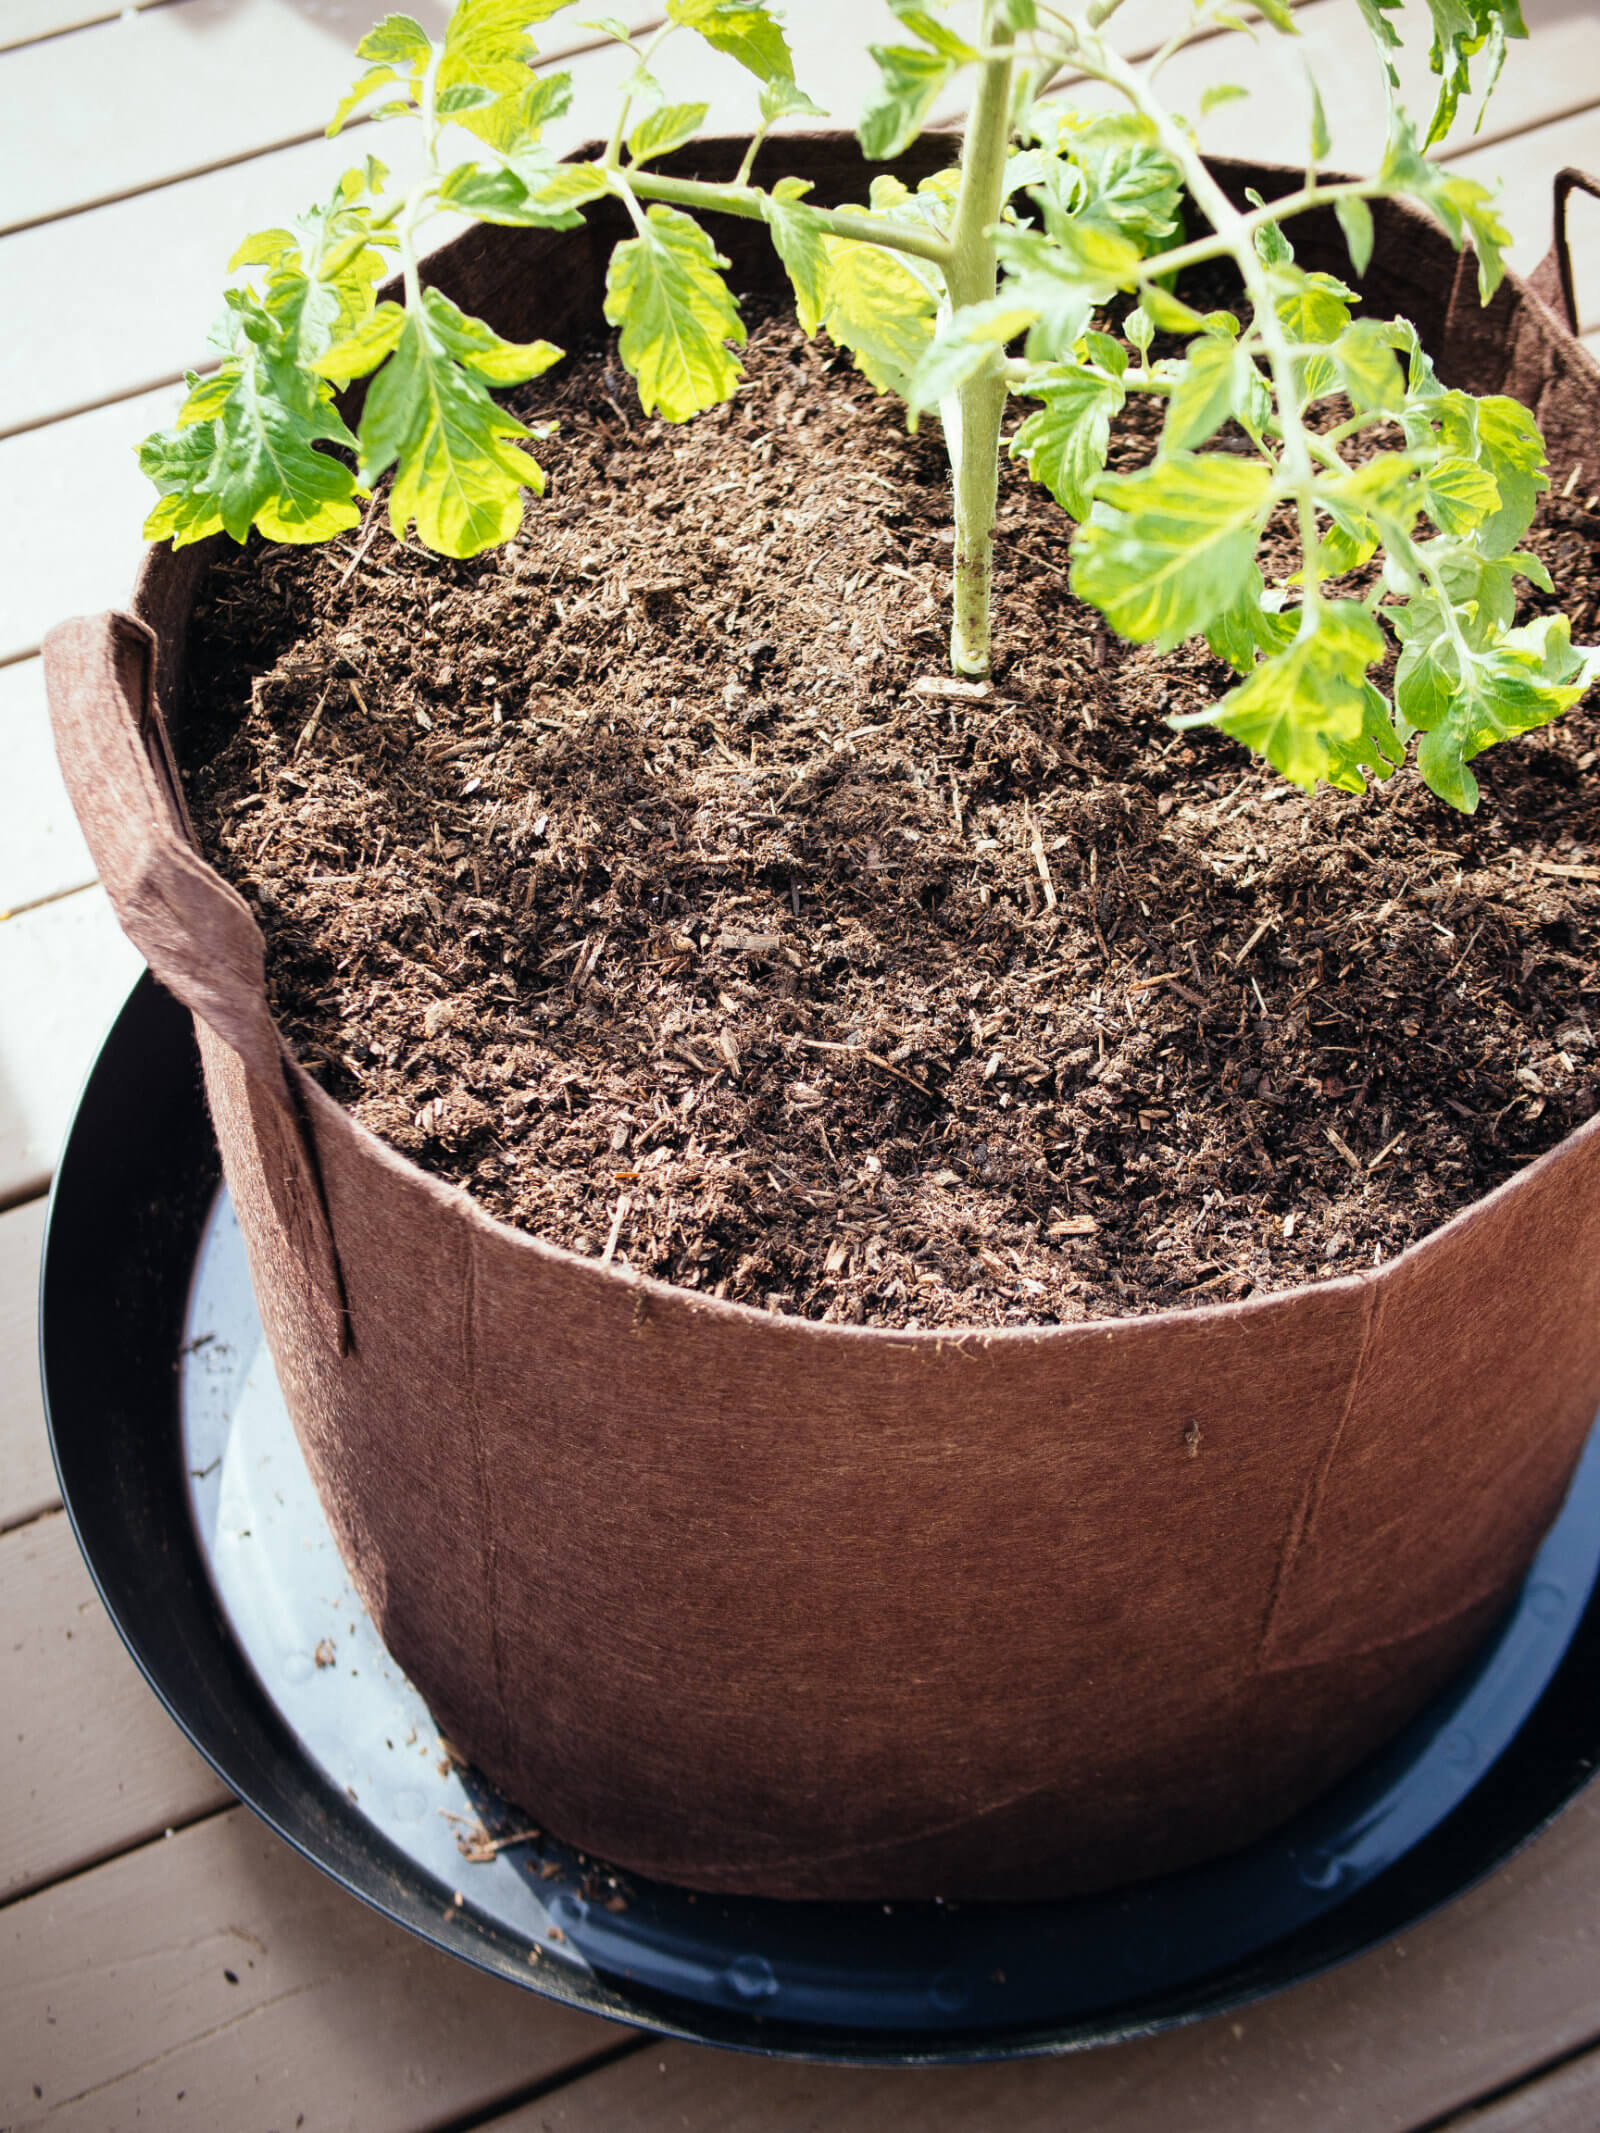 Use high-quality potting soil for growing tomatoes in containers